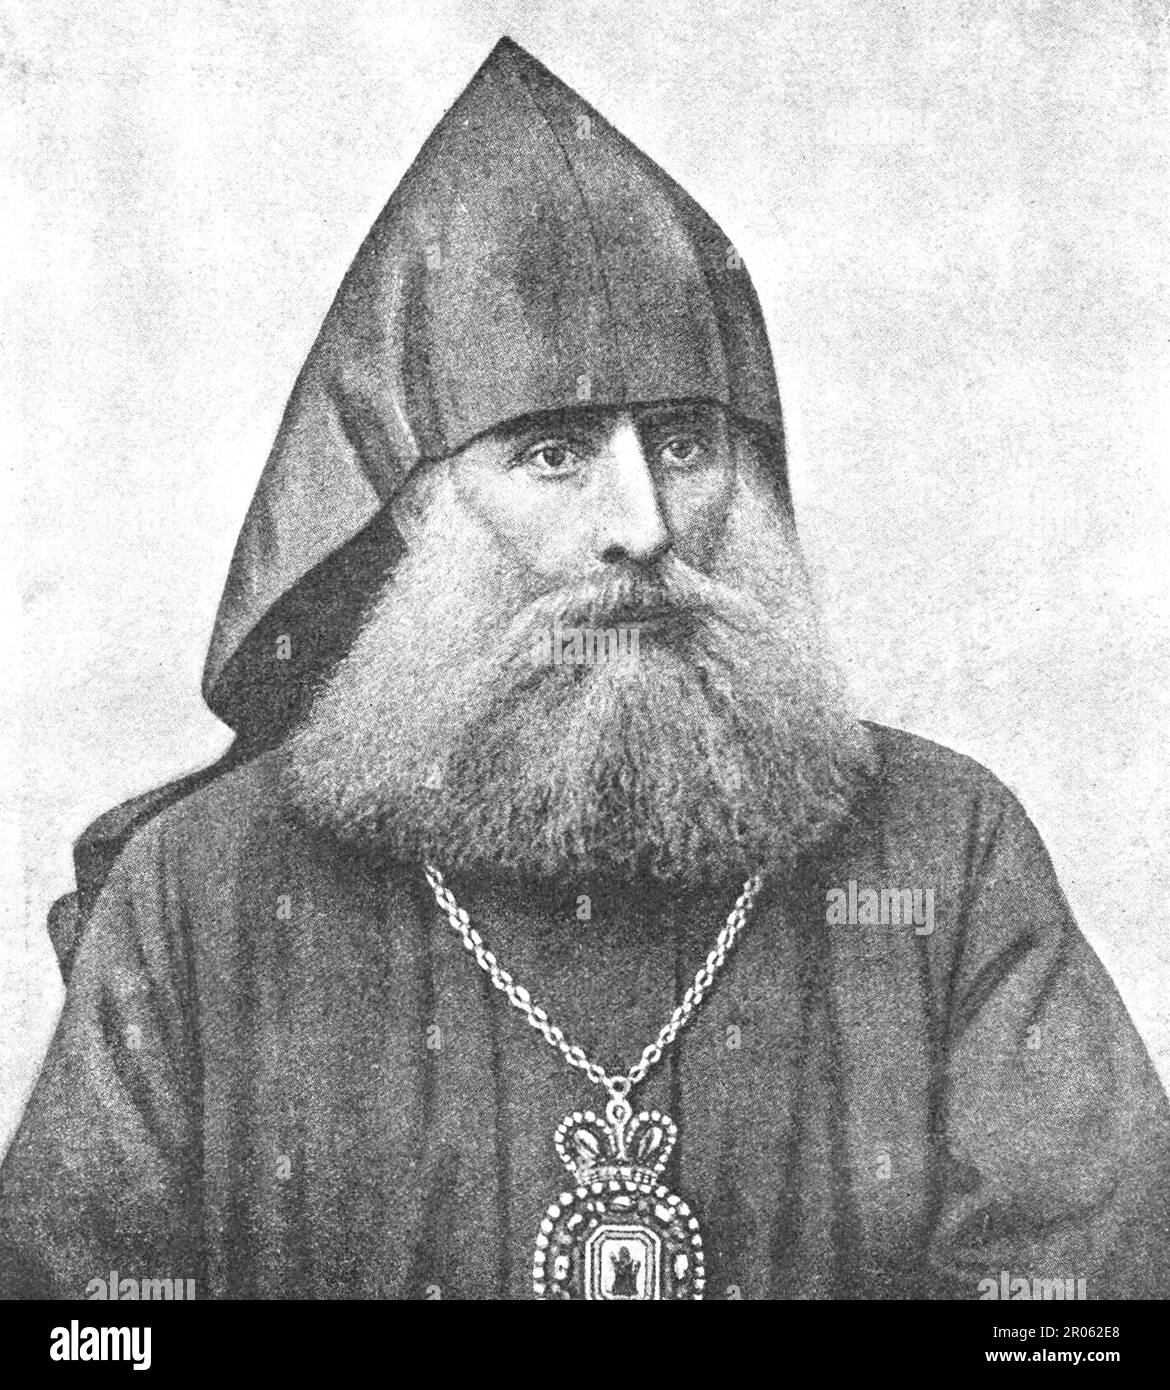 Matthew II Izmirlian, Matthew II of Constantinople (1845 –1910) was the Catholicos of All Armenians of the Armenian Apostolic Church at the Mother See of Holy Etchmiadzin in 1908–1910. He succeeded Mkrtich I Khrimian (better known as Khrimian Hayrik), who reigned as Catholicos from 1892 to 1907. Stock Photo